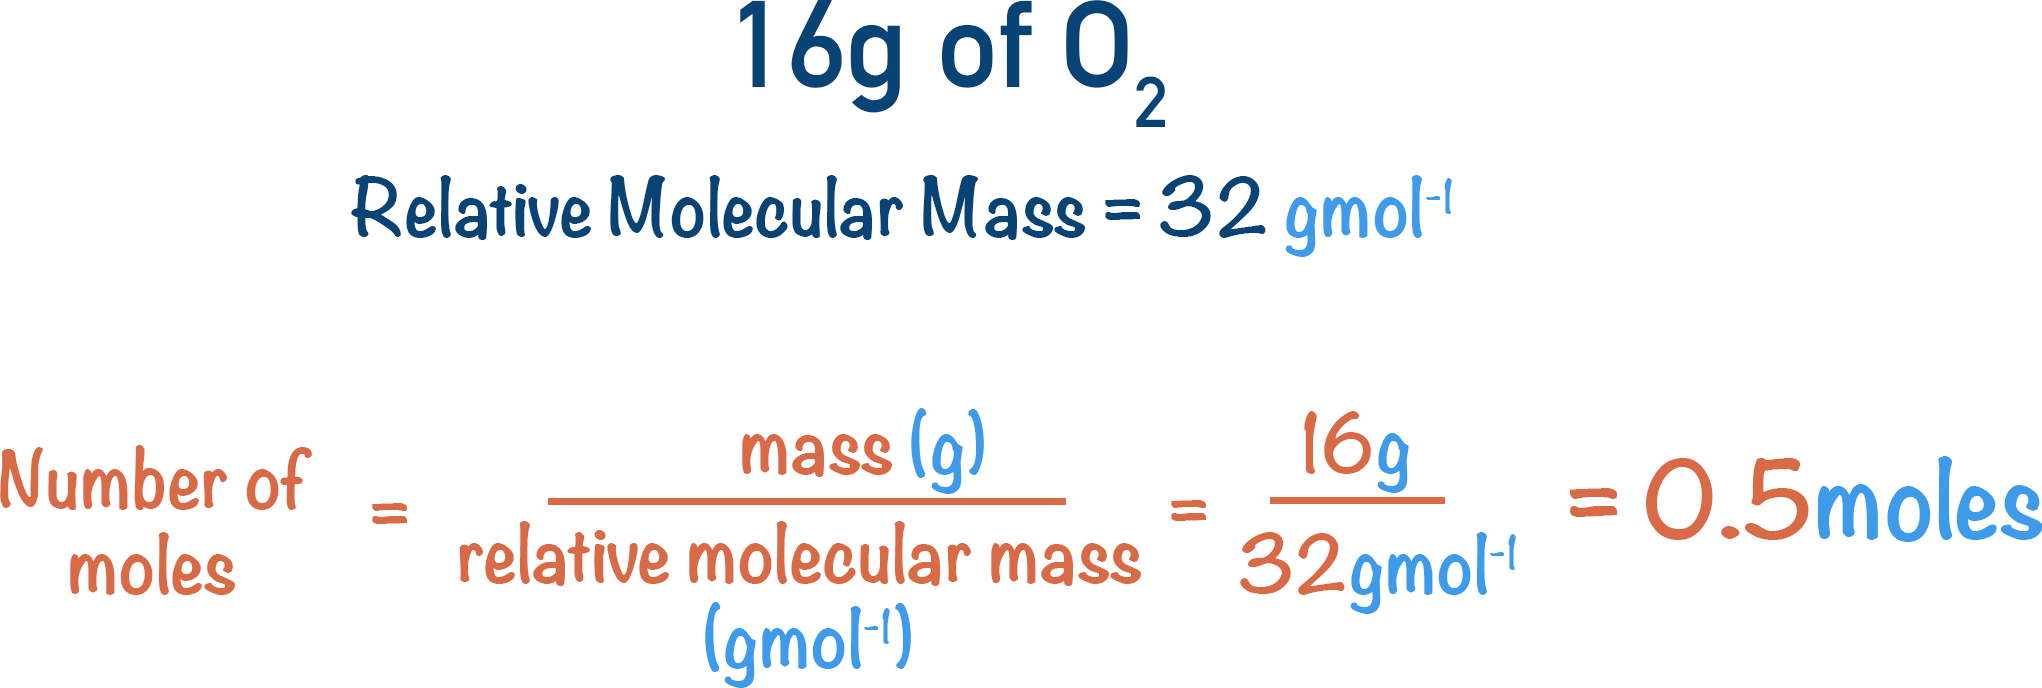 using mass of oxygen and relative molecular mass to find moles